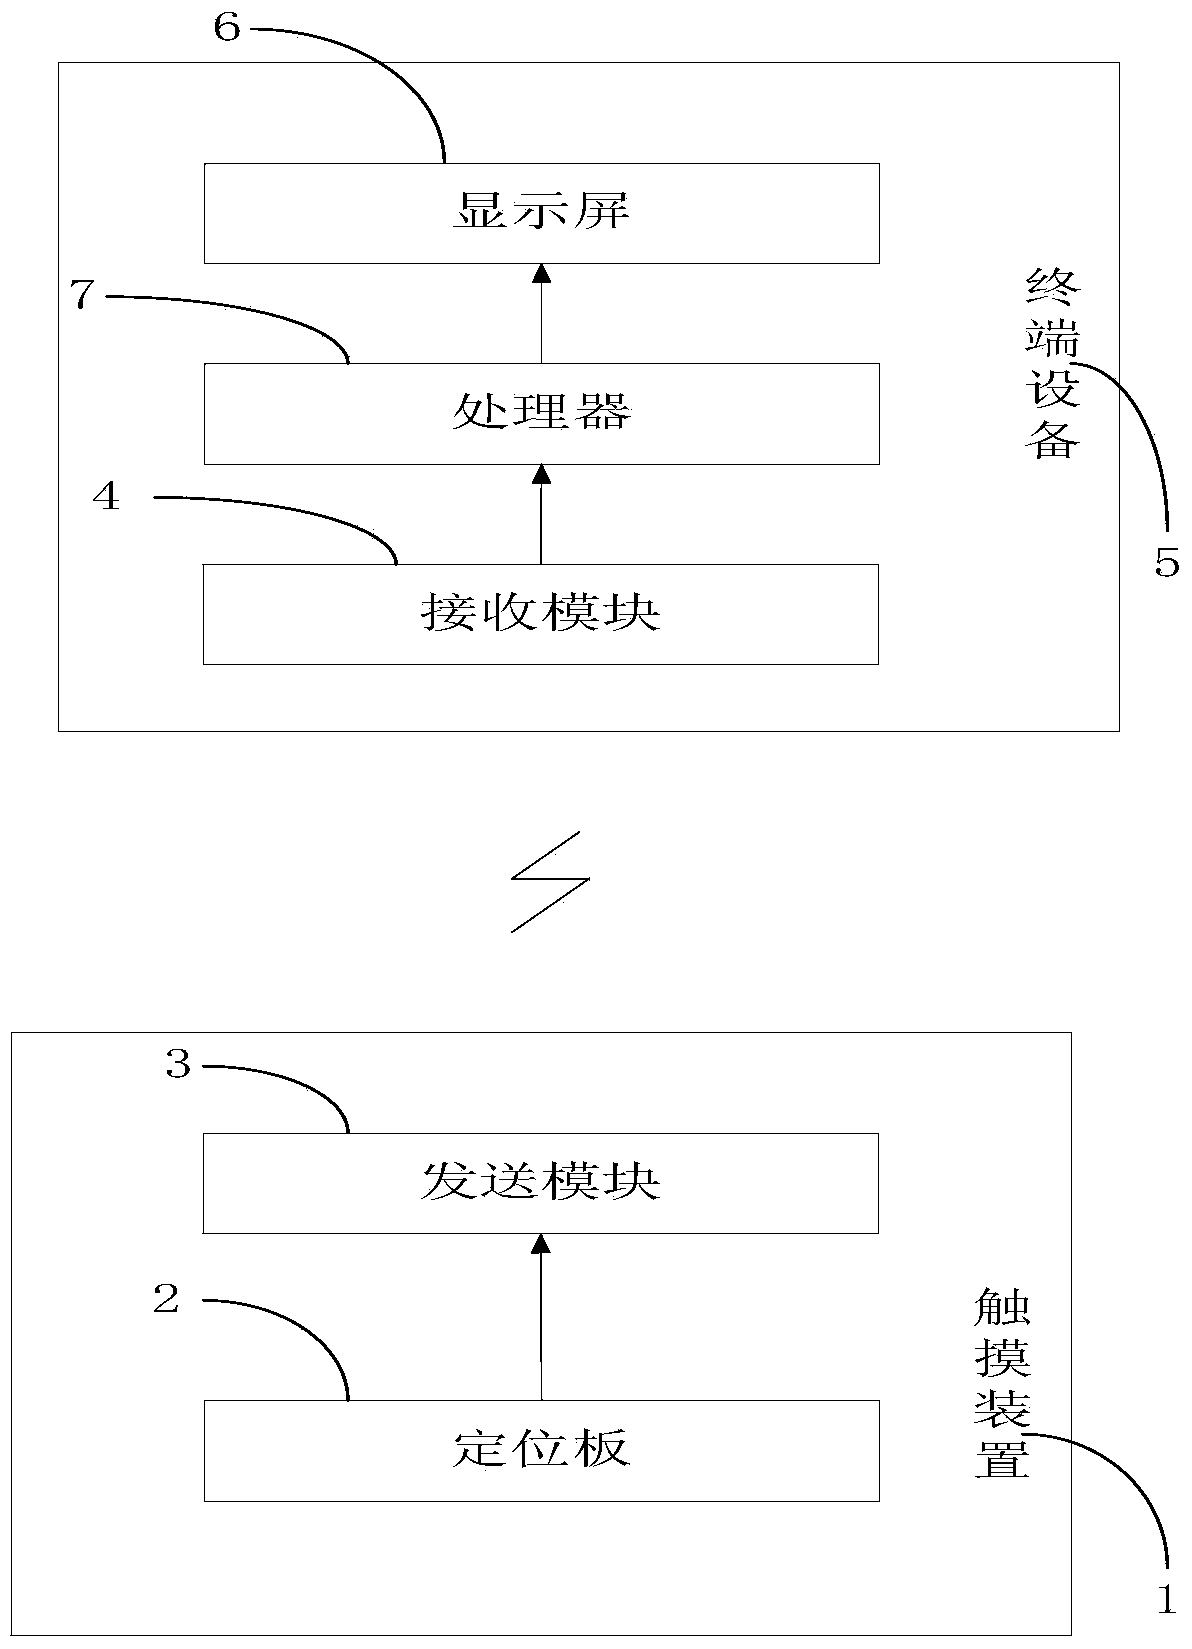 Method and device for controlling terminal device through marker